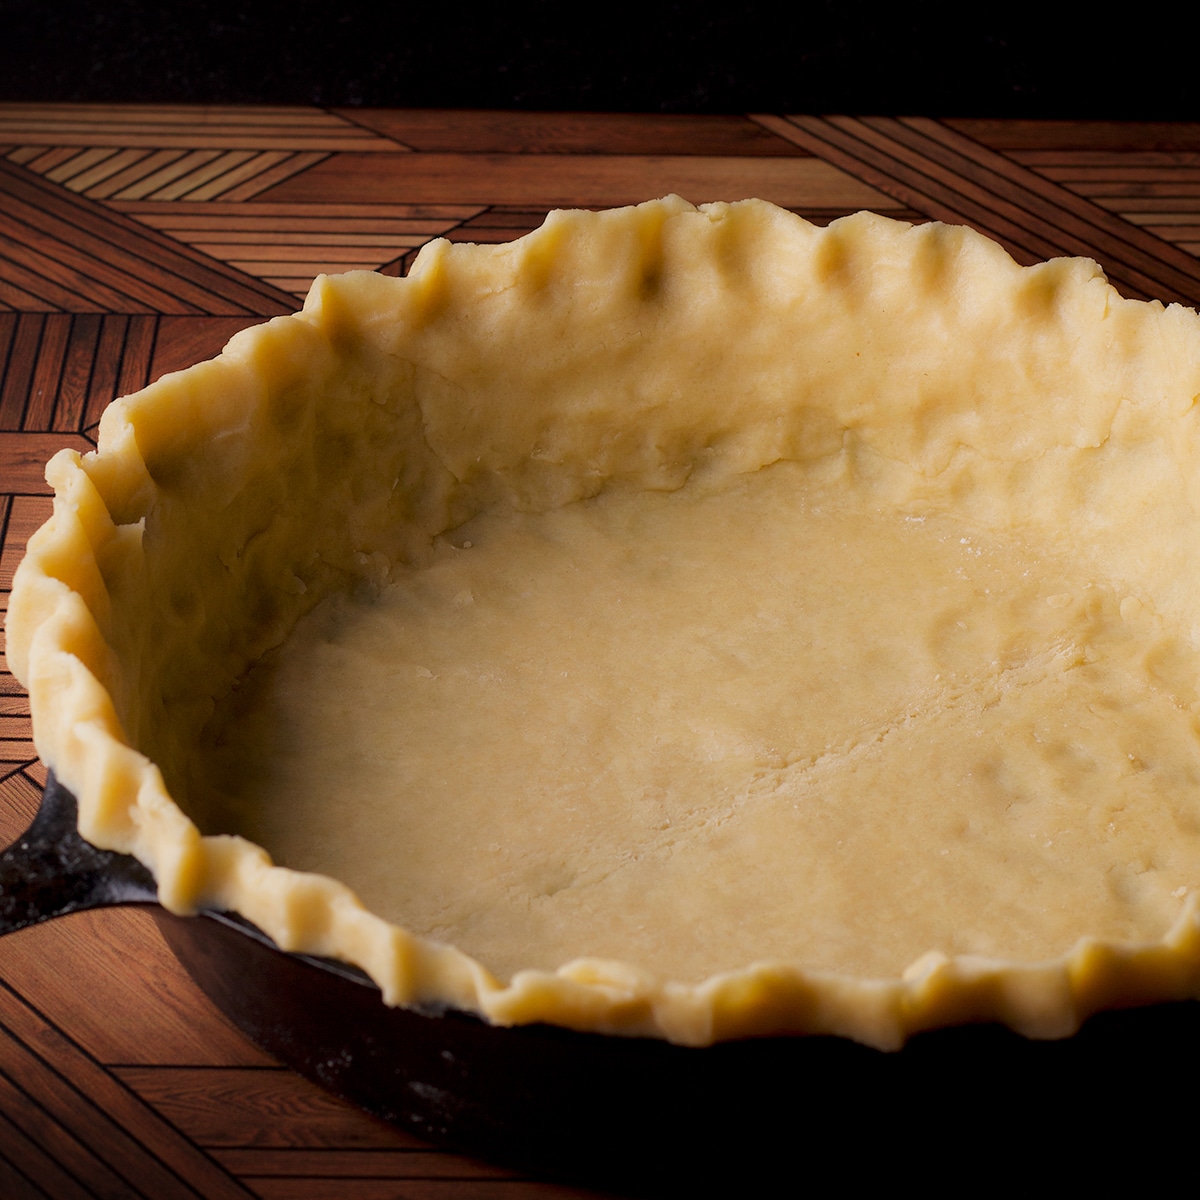 A cast iron skillet that's been lined with pie crust.